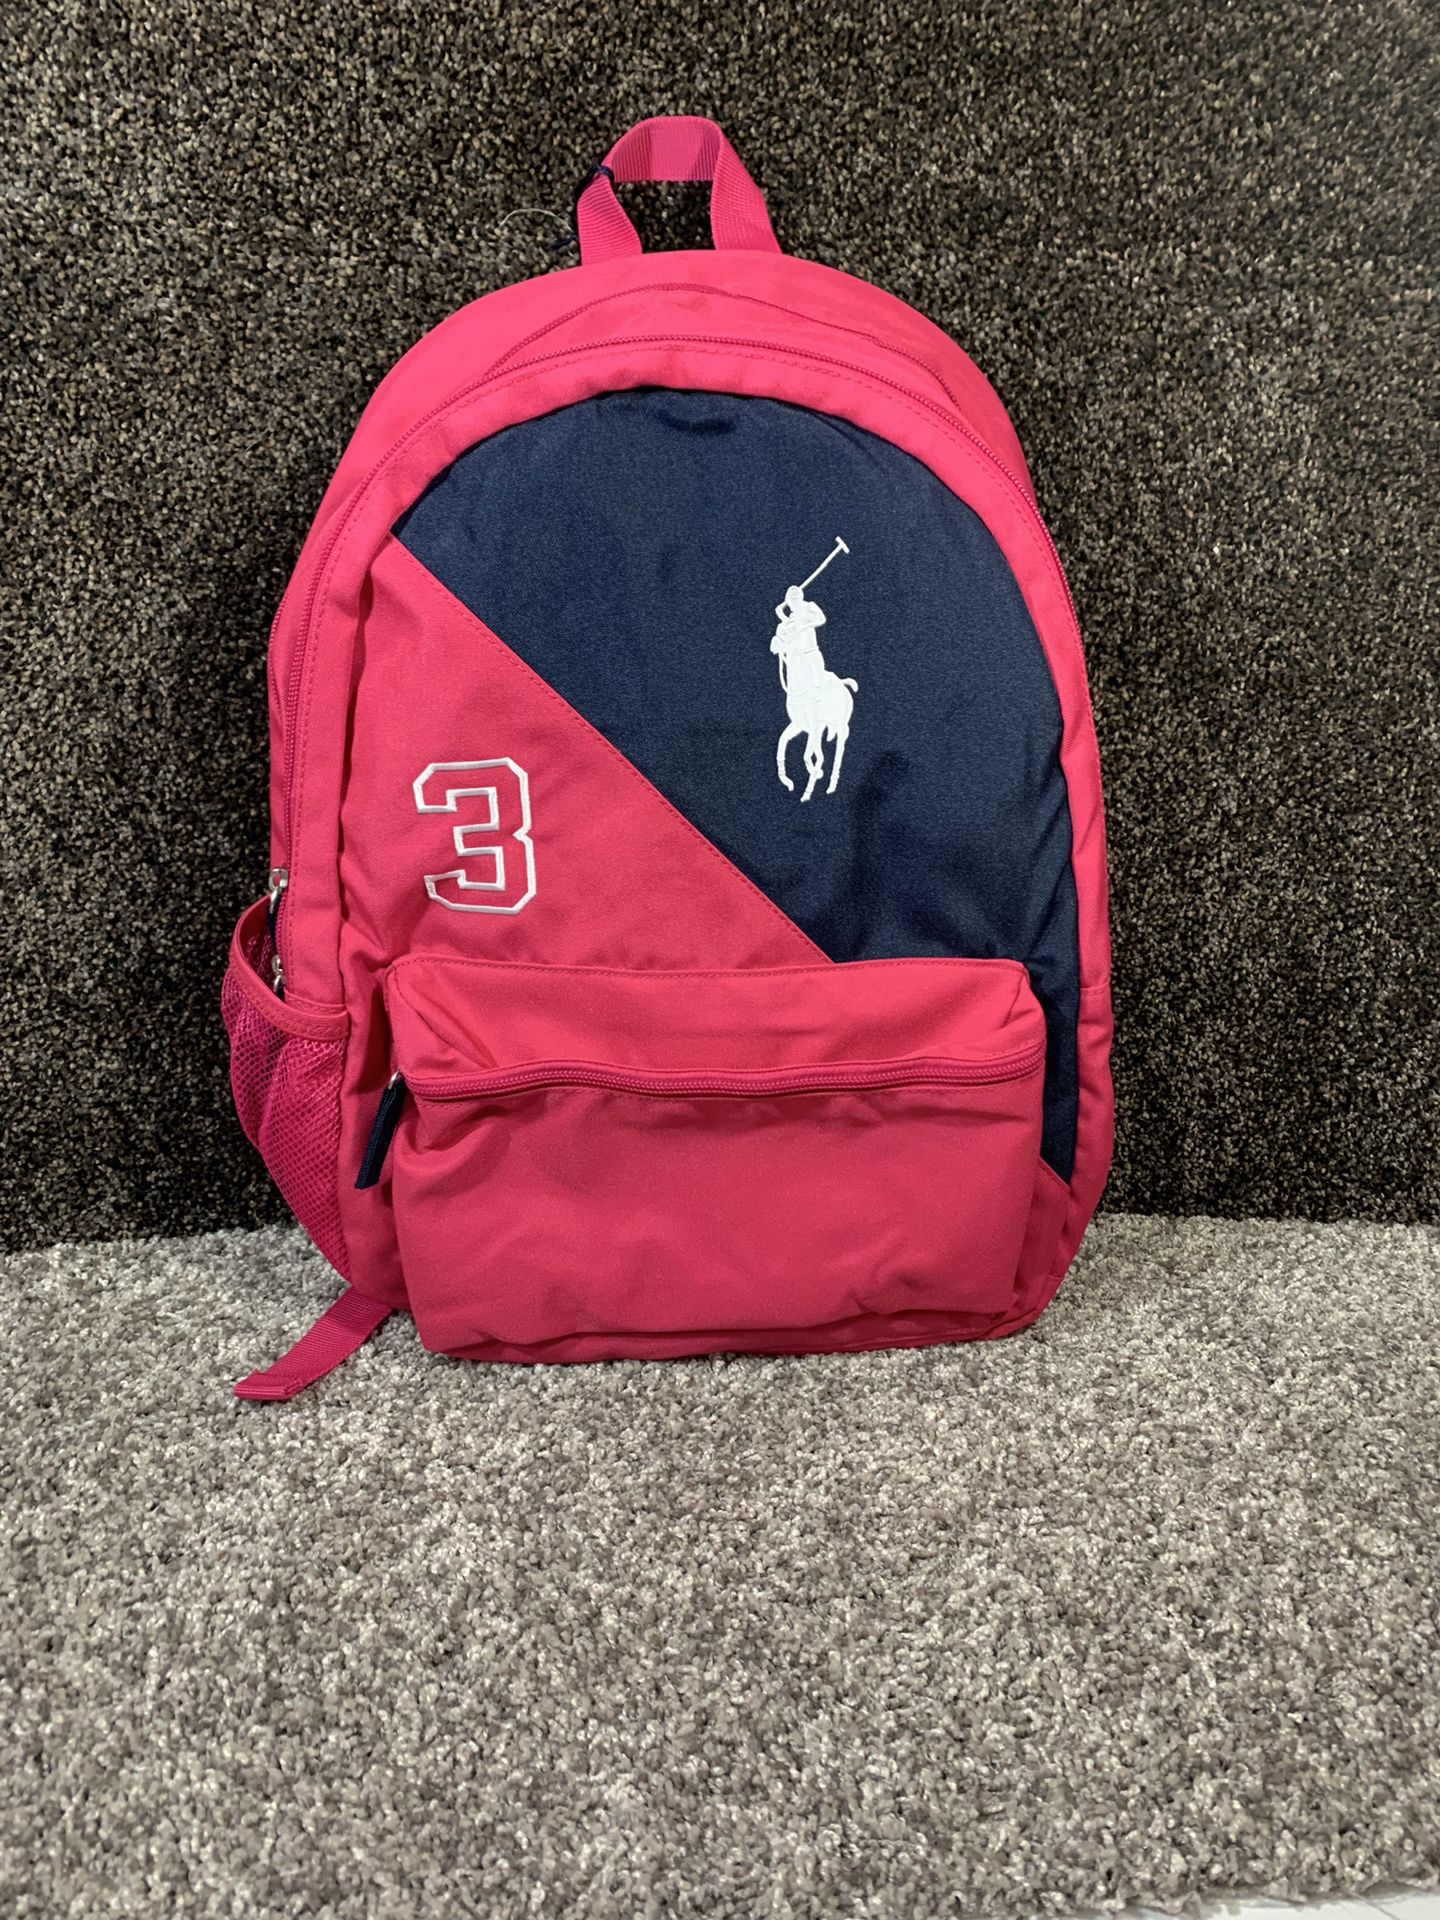 Polo Ralph Lauren Authentic Banner Stripe 3 Backpack Fuchsia/Navy/White - Pink/Blue/White Brand New With Tags Authenticity Guaranteed MSRP $150.00